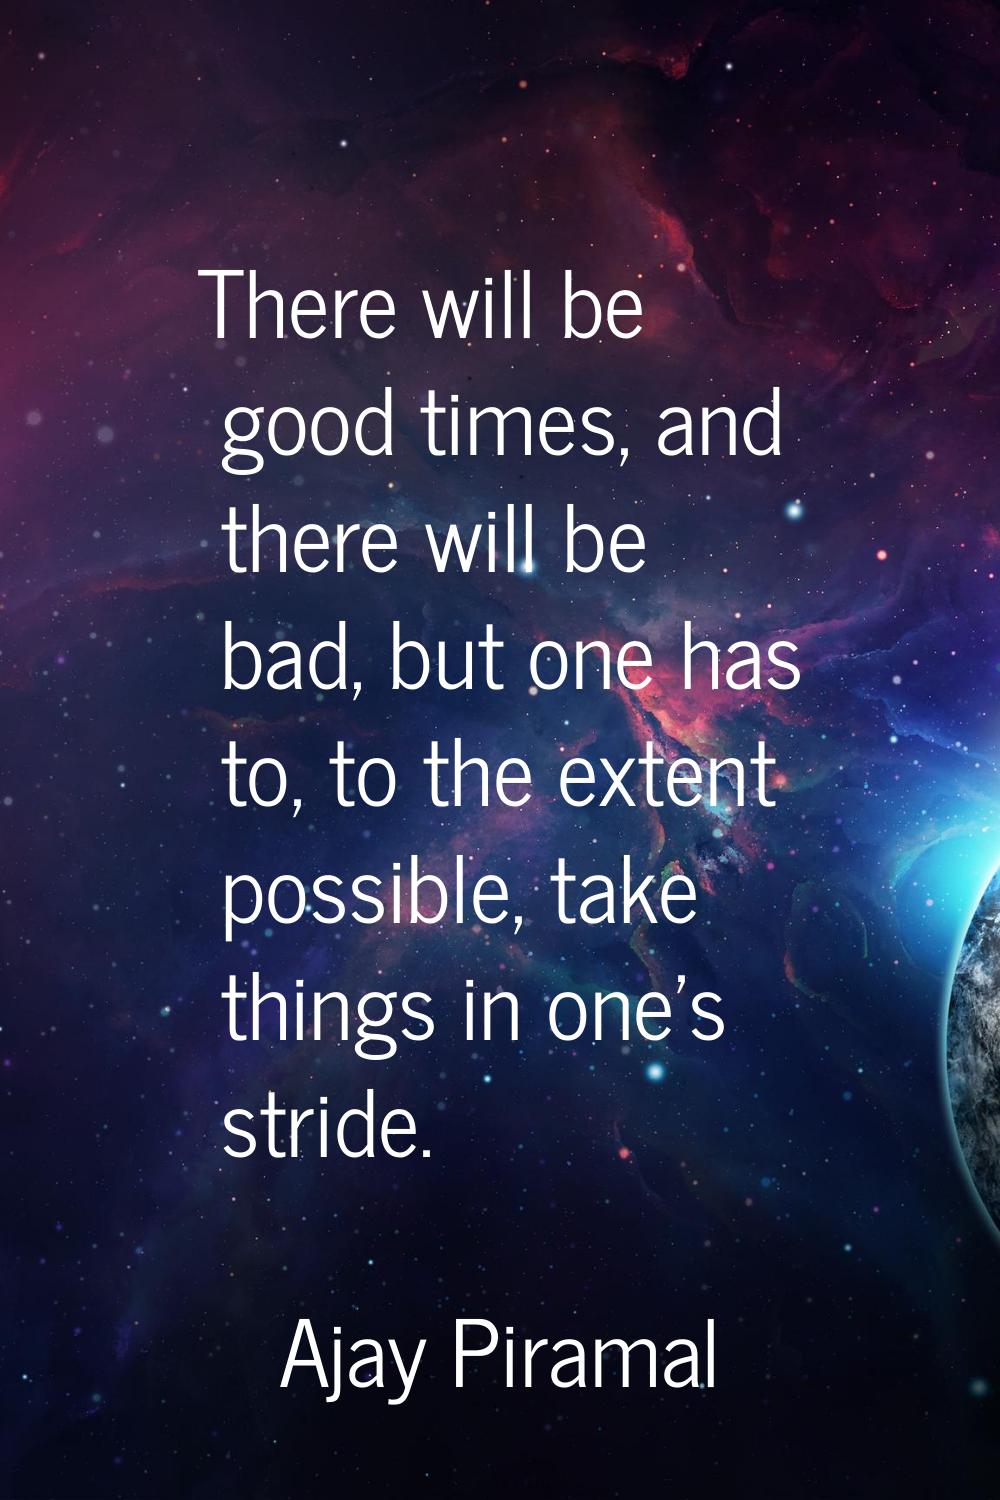 There will be good times, and there will be bad, but one has to, to the extent possible, take thing